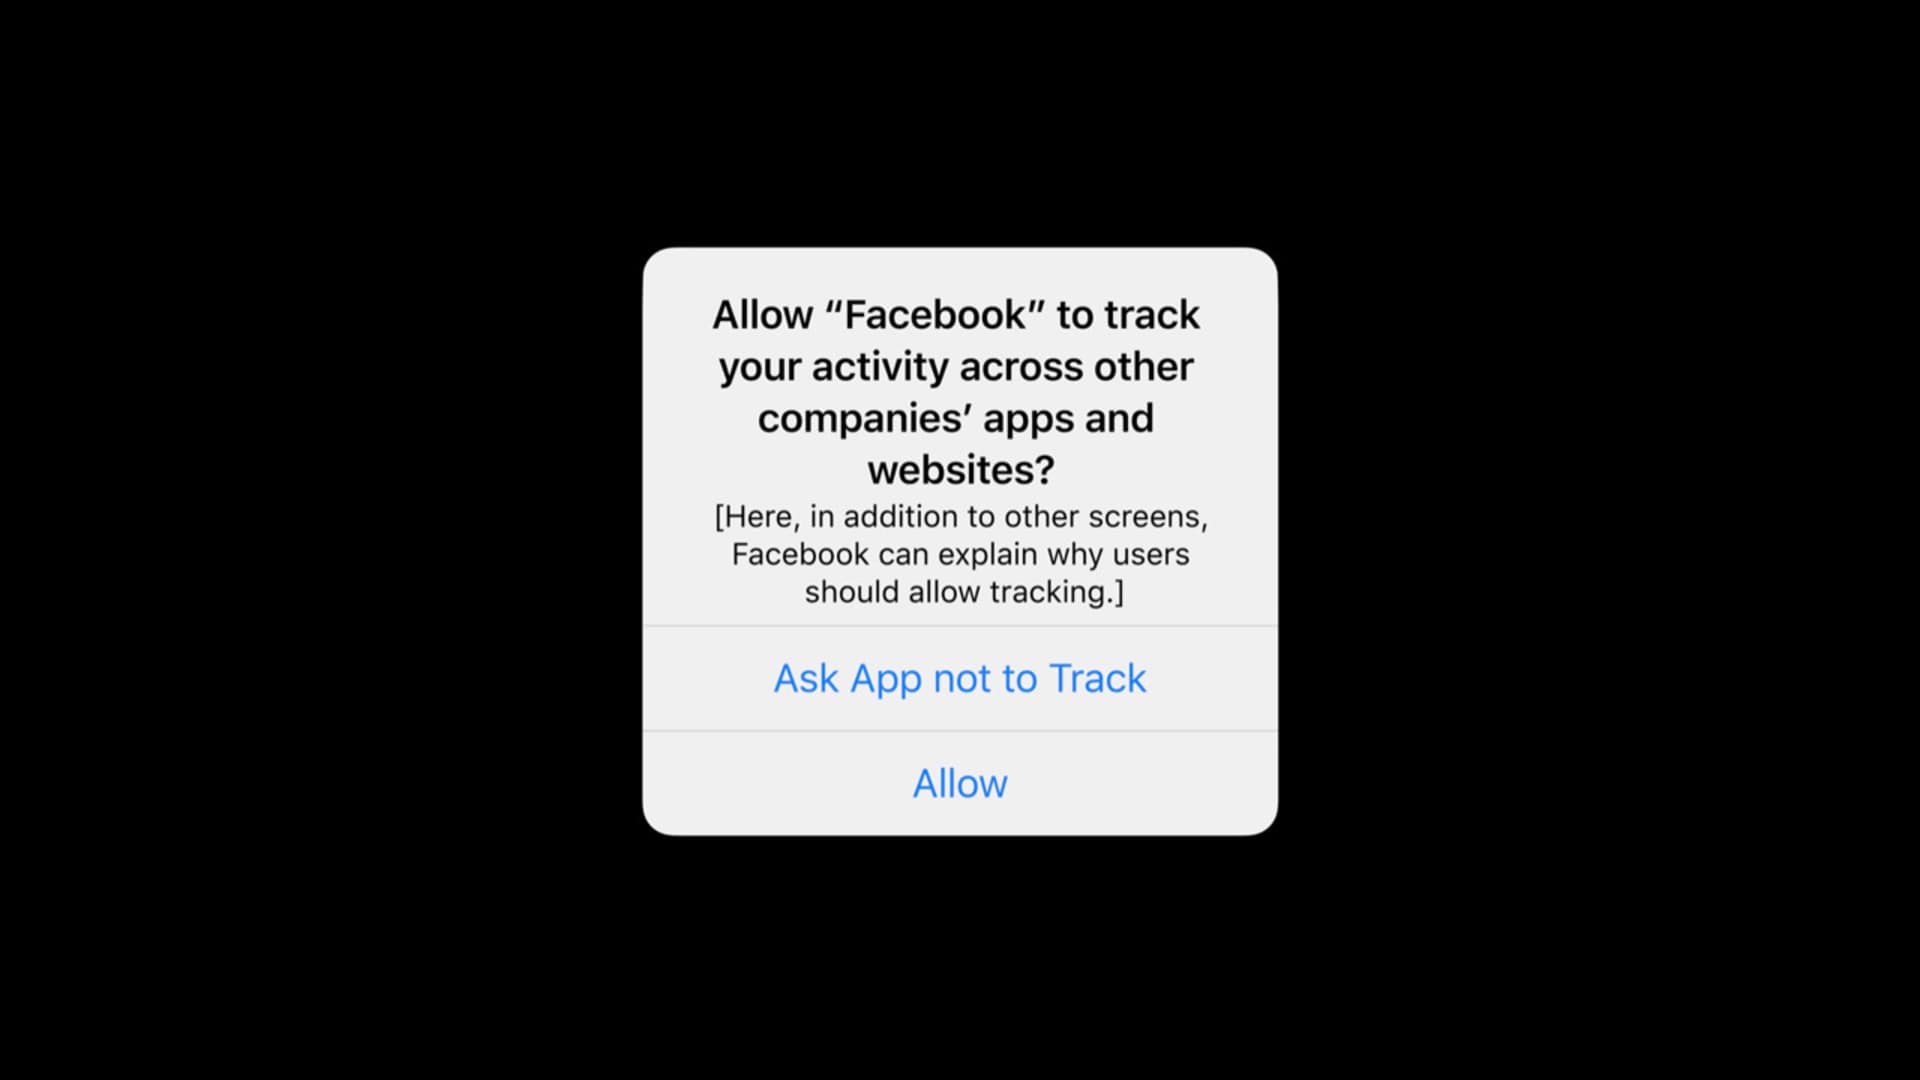 A mockup of the popup window iPhone users will see before using an app that tracks their data. This image was provided by Apple.